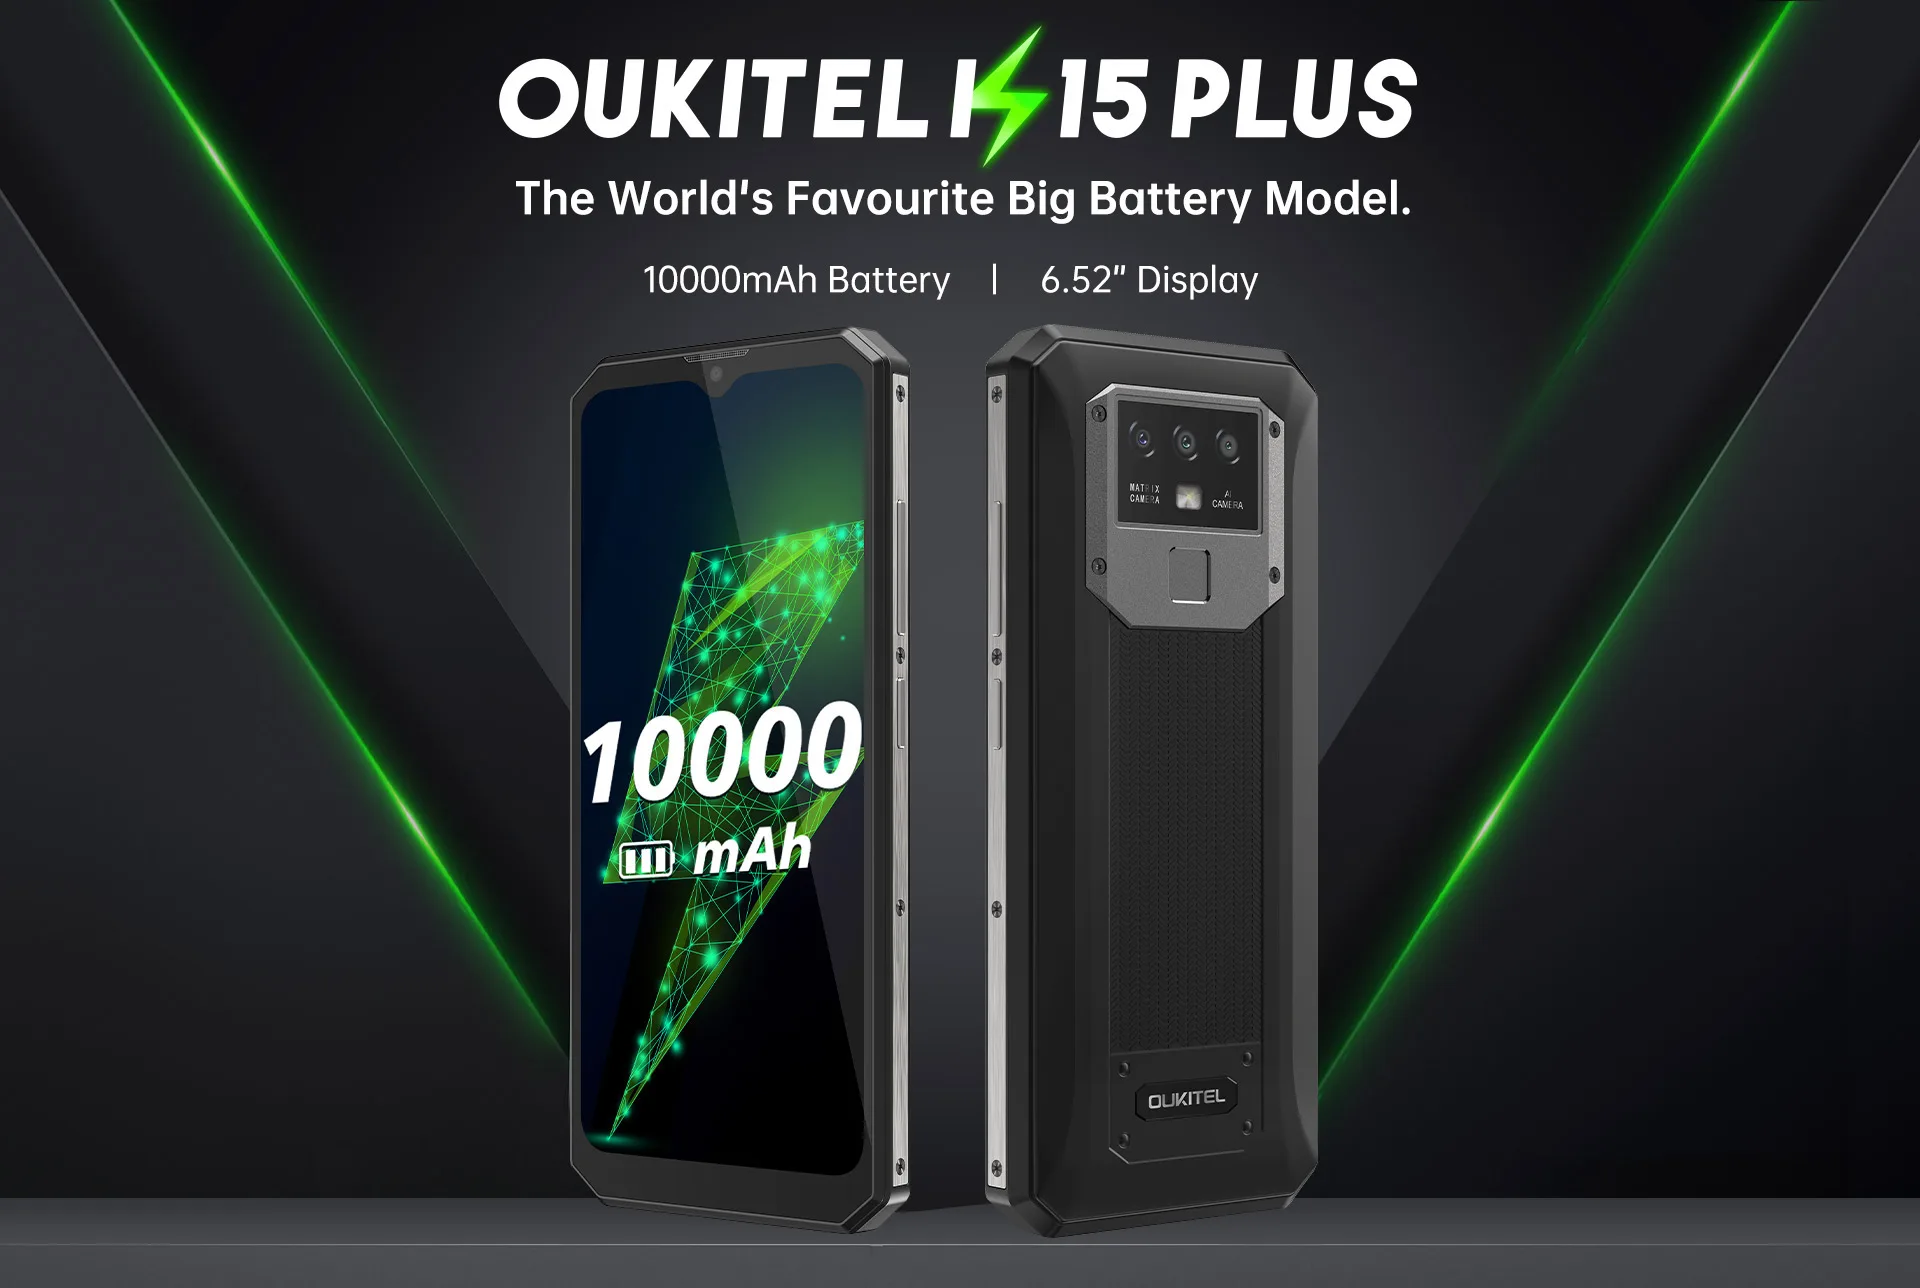 cell phone ratings android OUKITEL K15 Plus 6.52'' 10000mAh Smartphone 4GB+32GB Quad Core Android 10.0 Face ID Unlock 13MP Triple Cameras Mobile Phone NFC best android cellphones